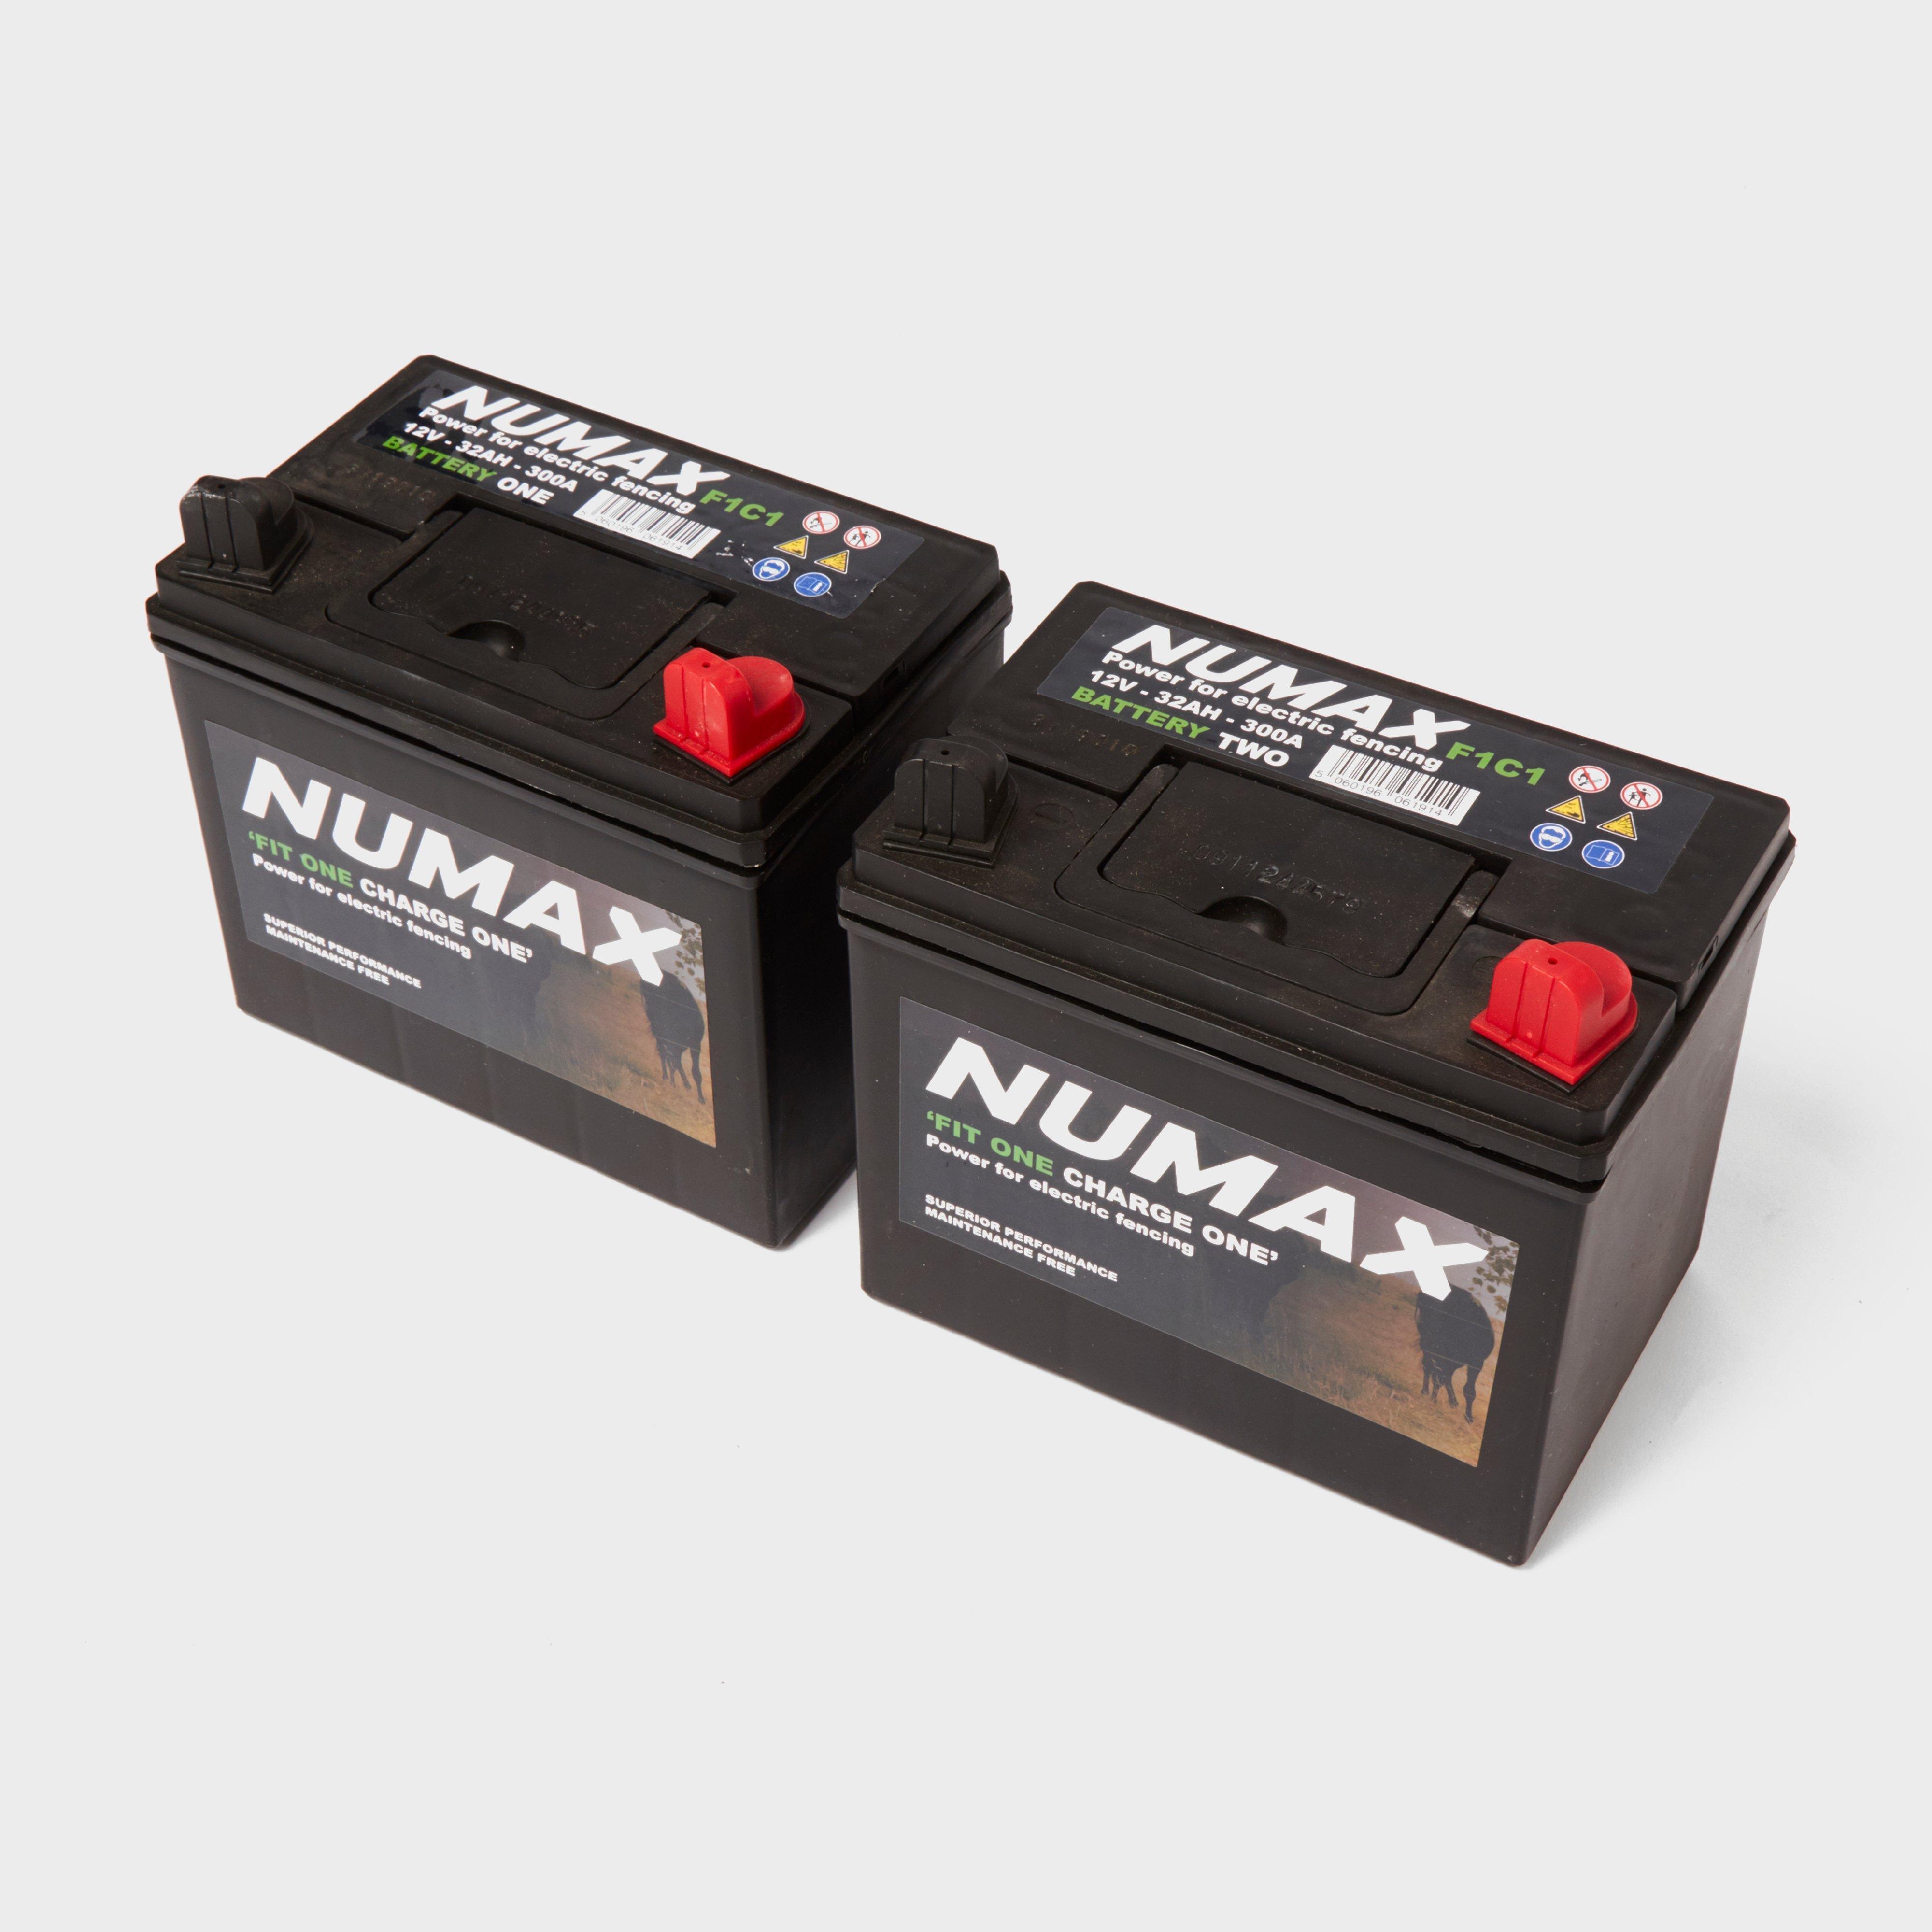 Numax ‘Fit One, Charge One’ Battery Charger Kit Review